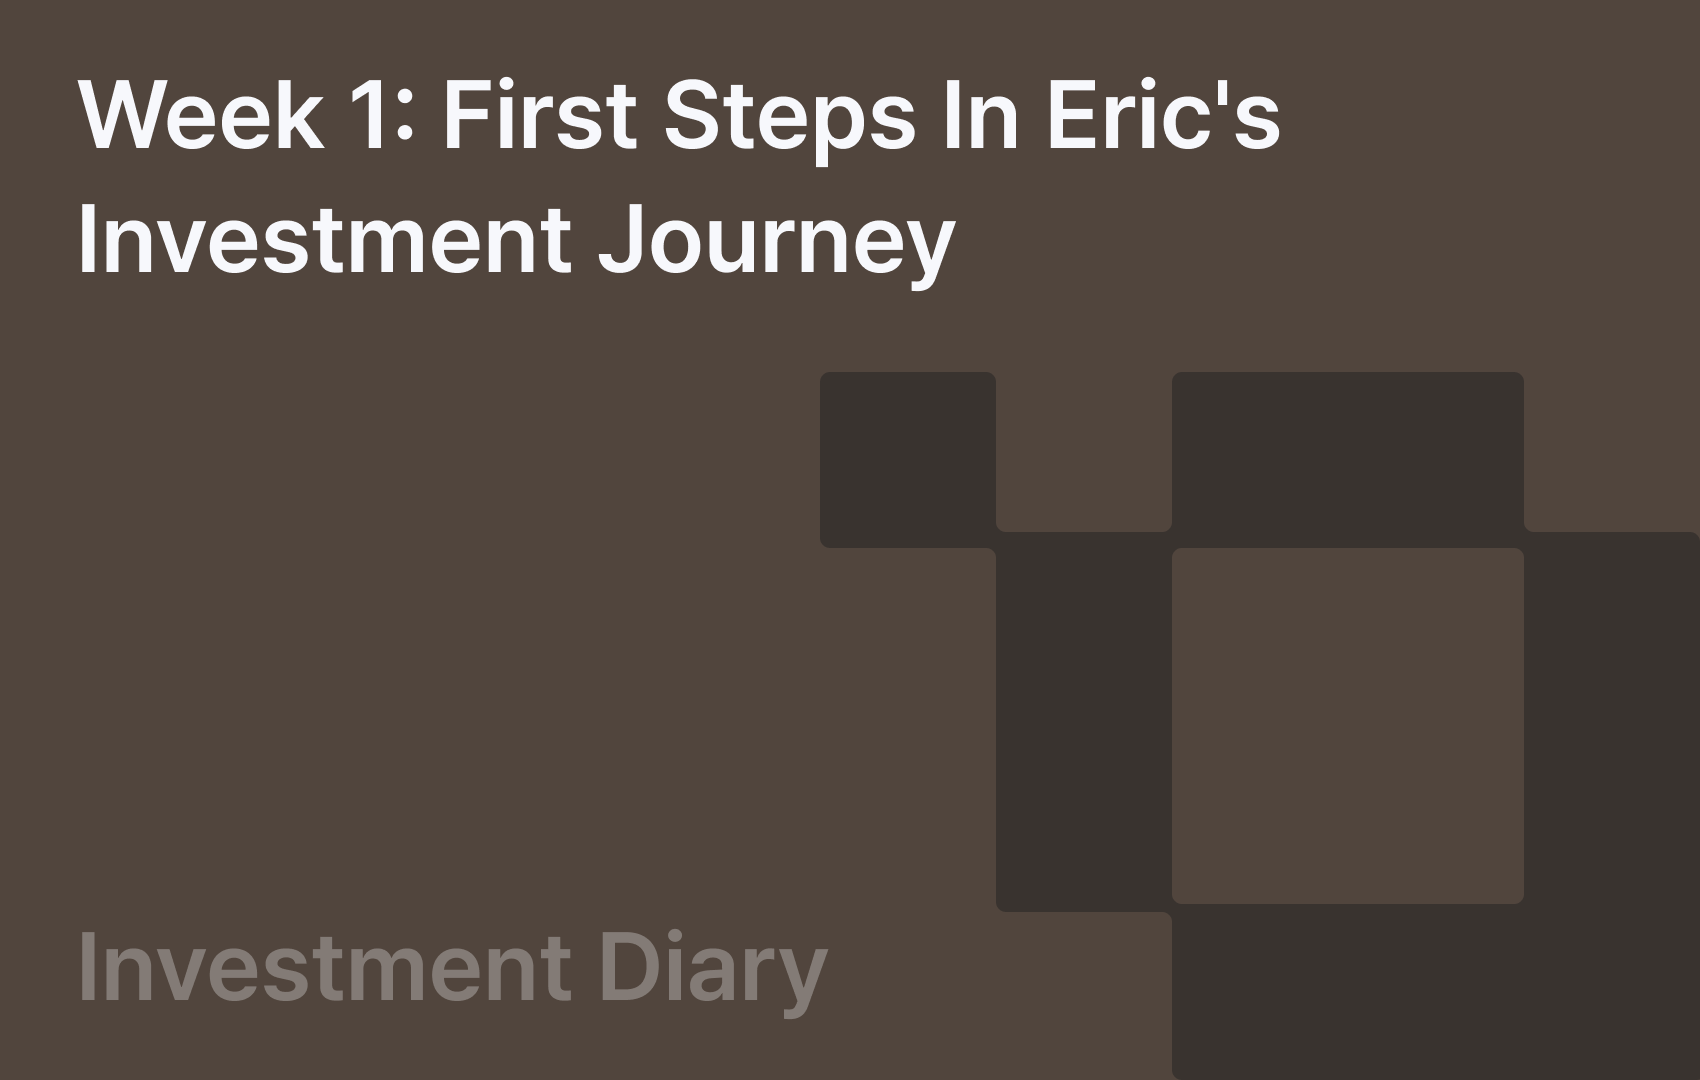 Week 1: First Steps in Eric's Investment Journey